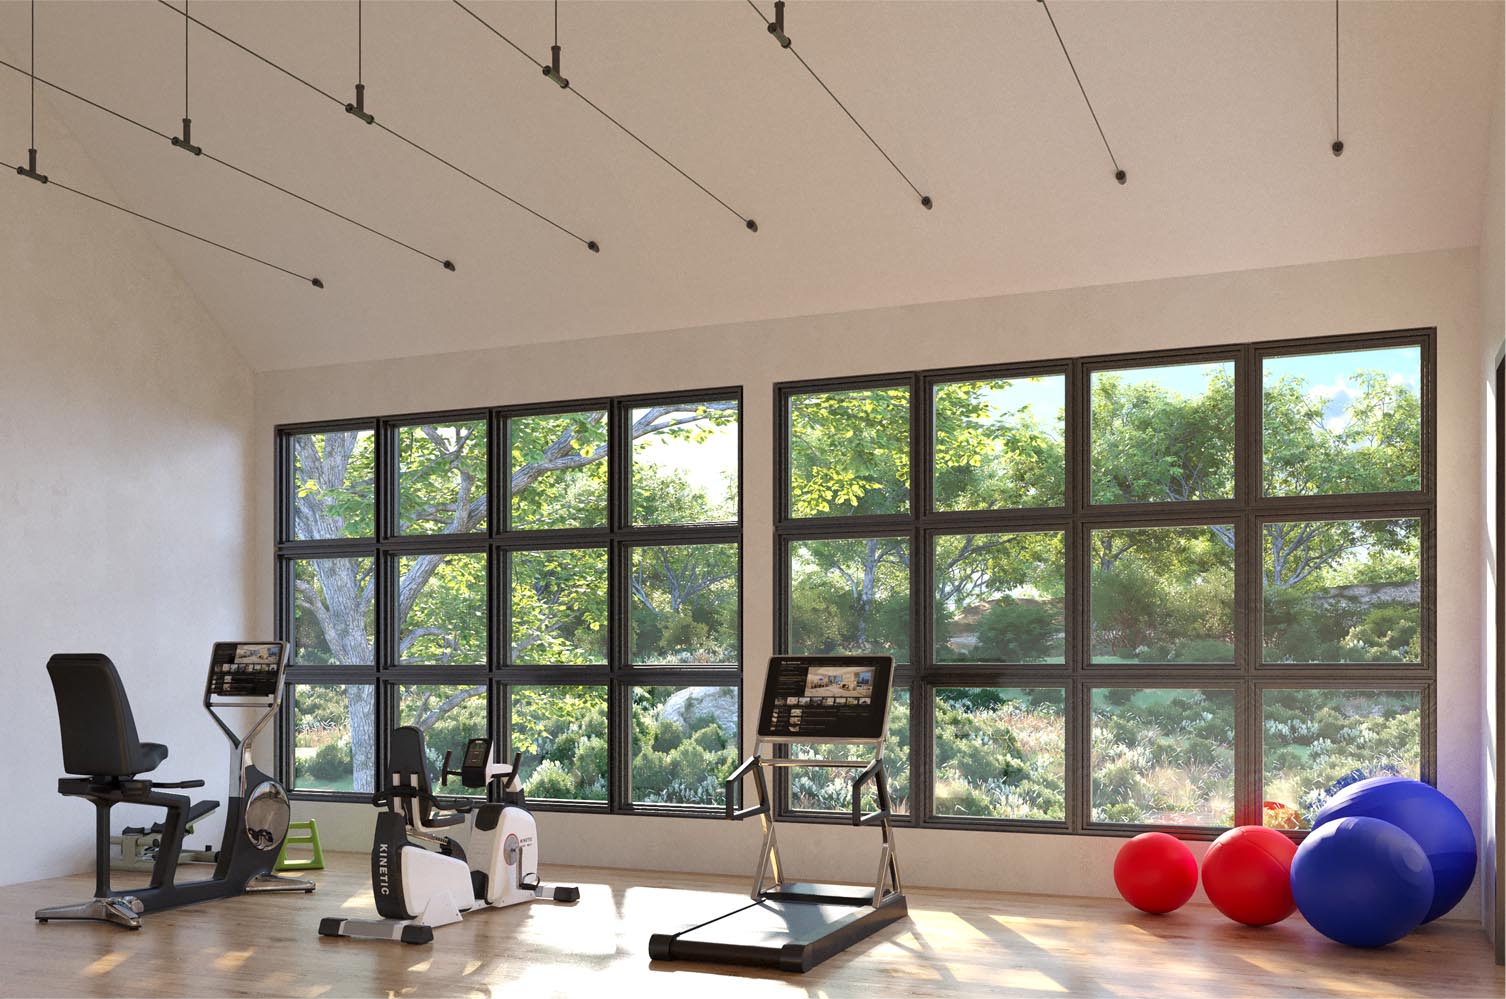 Exercise room addition in Bridgewater, New Jersey